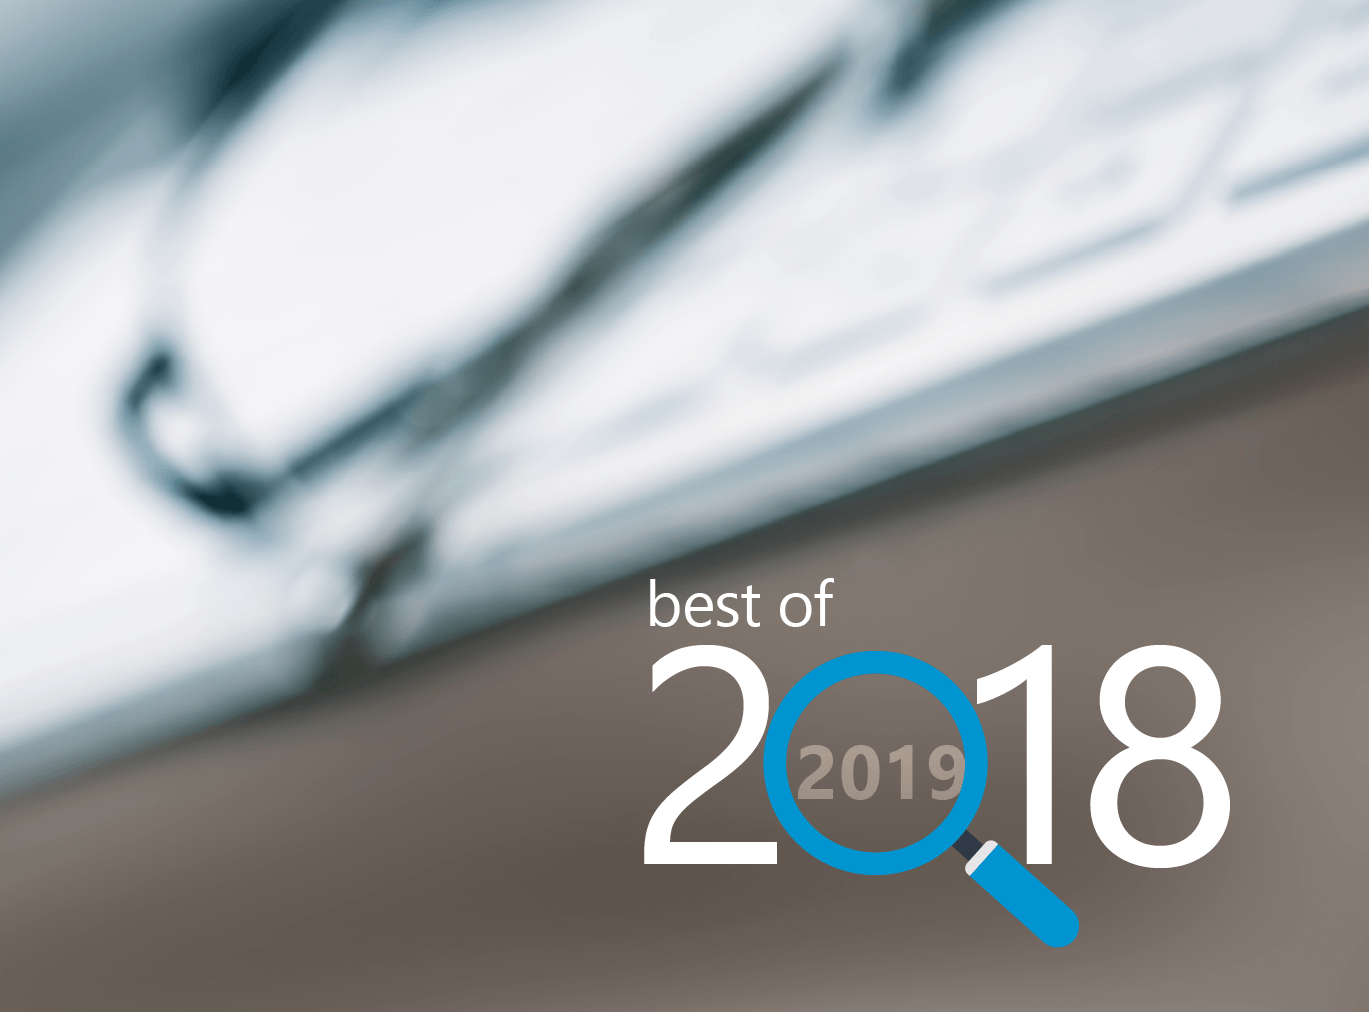 Our Best of 2018